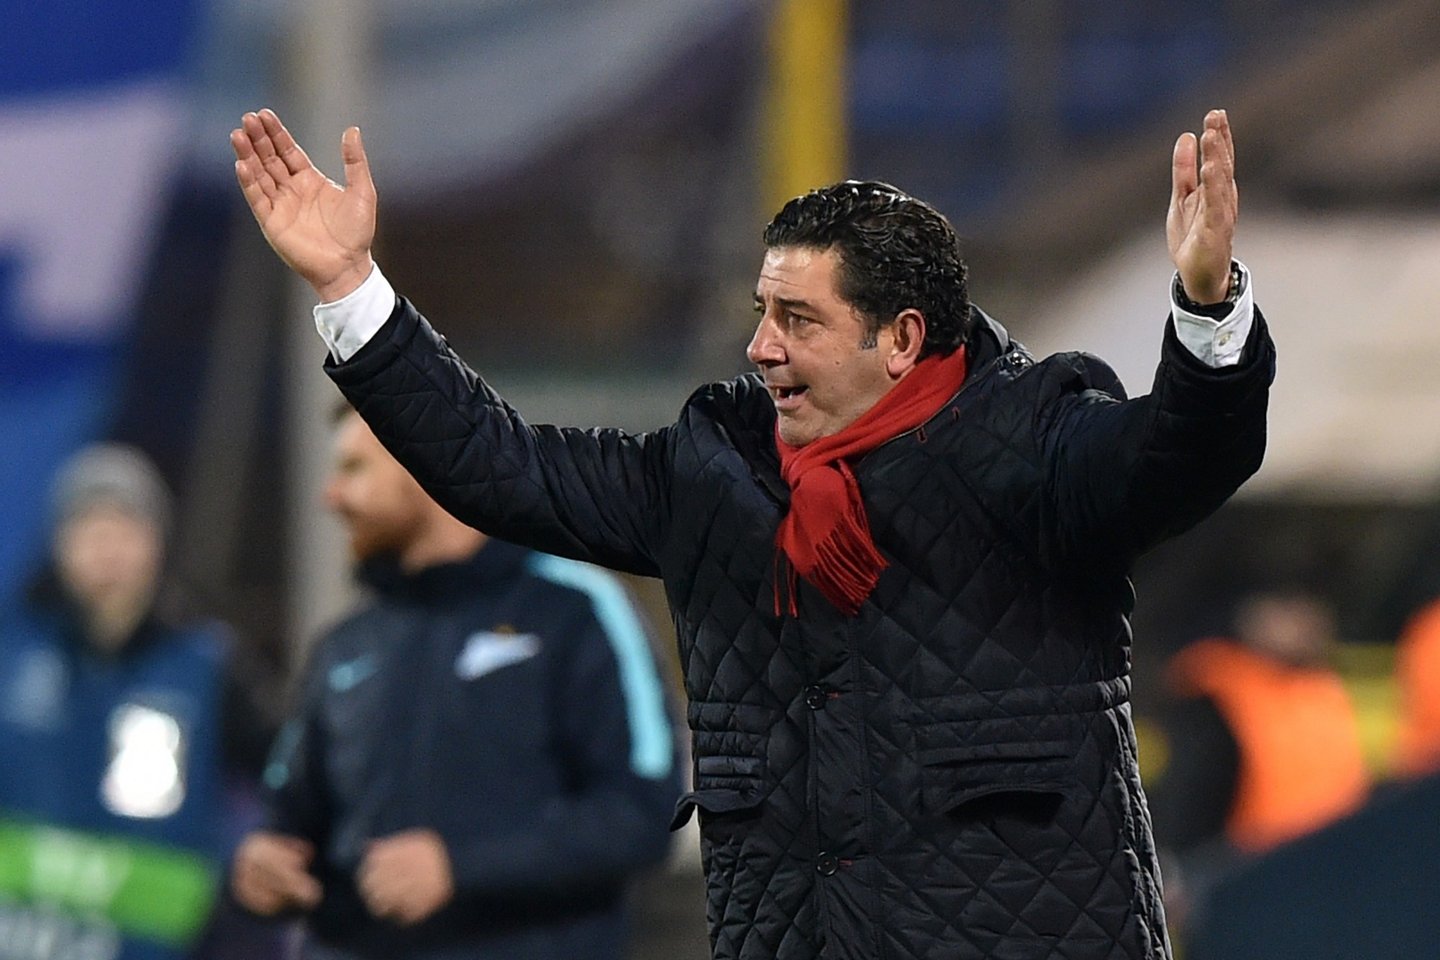 Benfica's coach Rui Vitoria reacts during the second-leg round of 16 UEFA Champions League football match FC Zenit vs SL Benfica at the Petrovsky stadium in St. Petersburg on March 9, 2016. AFP PHOTO / KIRILL KUDRYAVTSEV / AFP / KIRILL KUDRYAVTSEV (Photo credit should read KIRILL KUDRYAVTSEV/AFP/Getty Images)